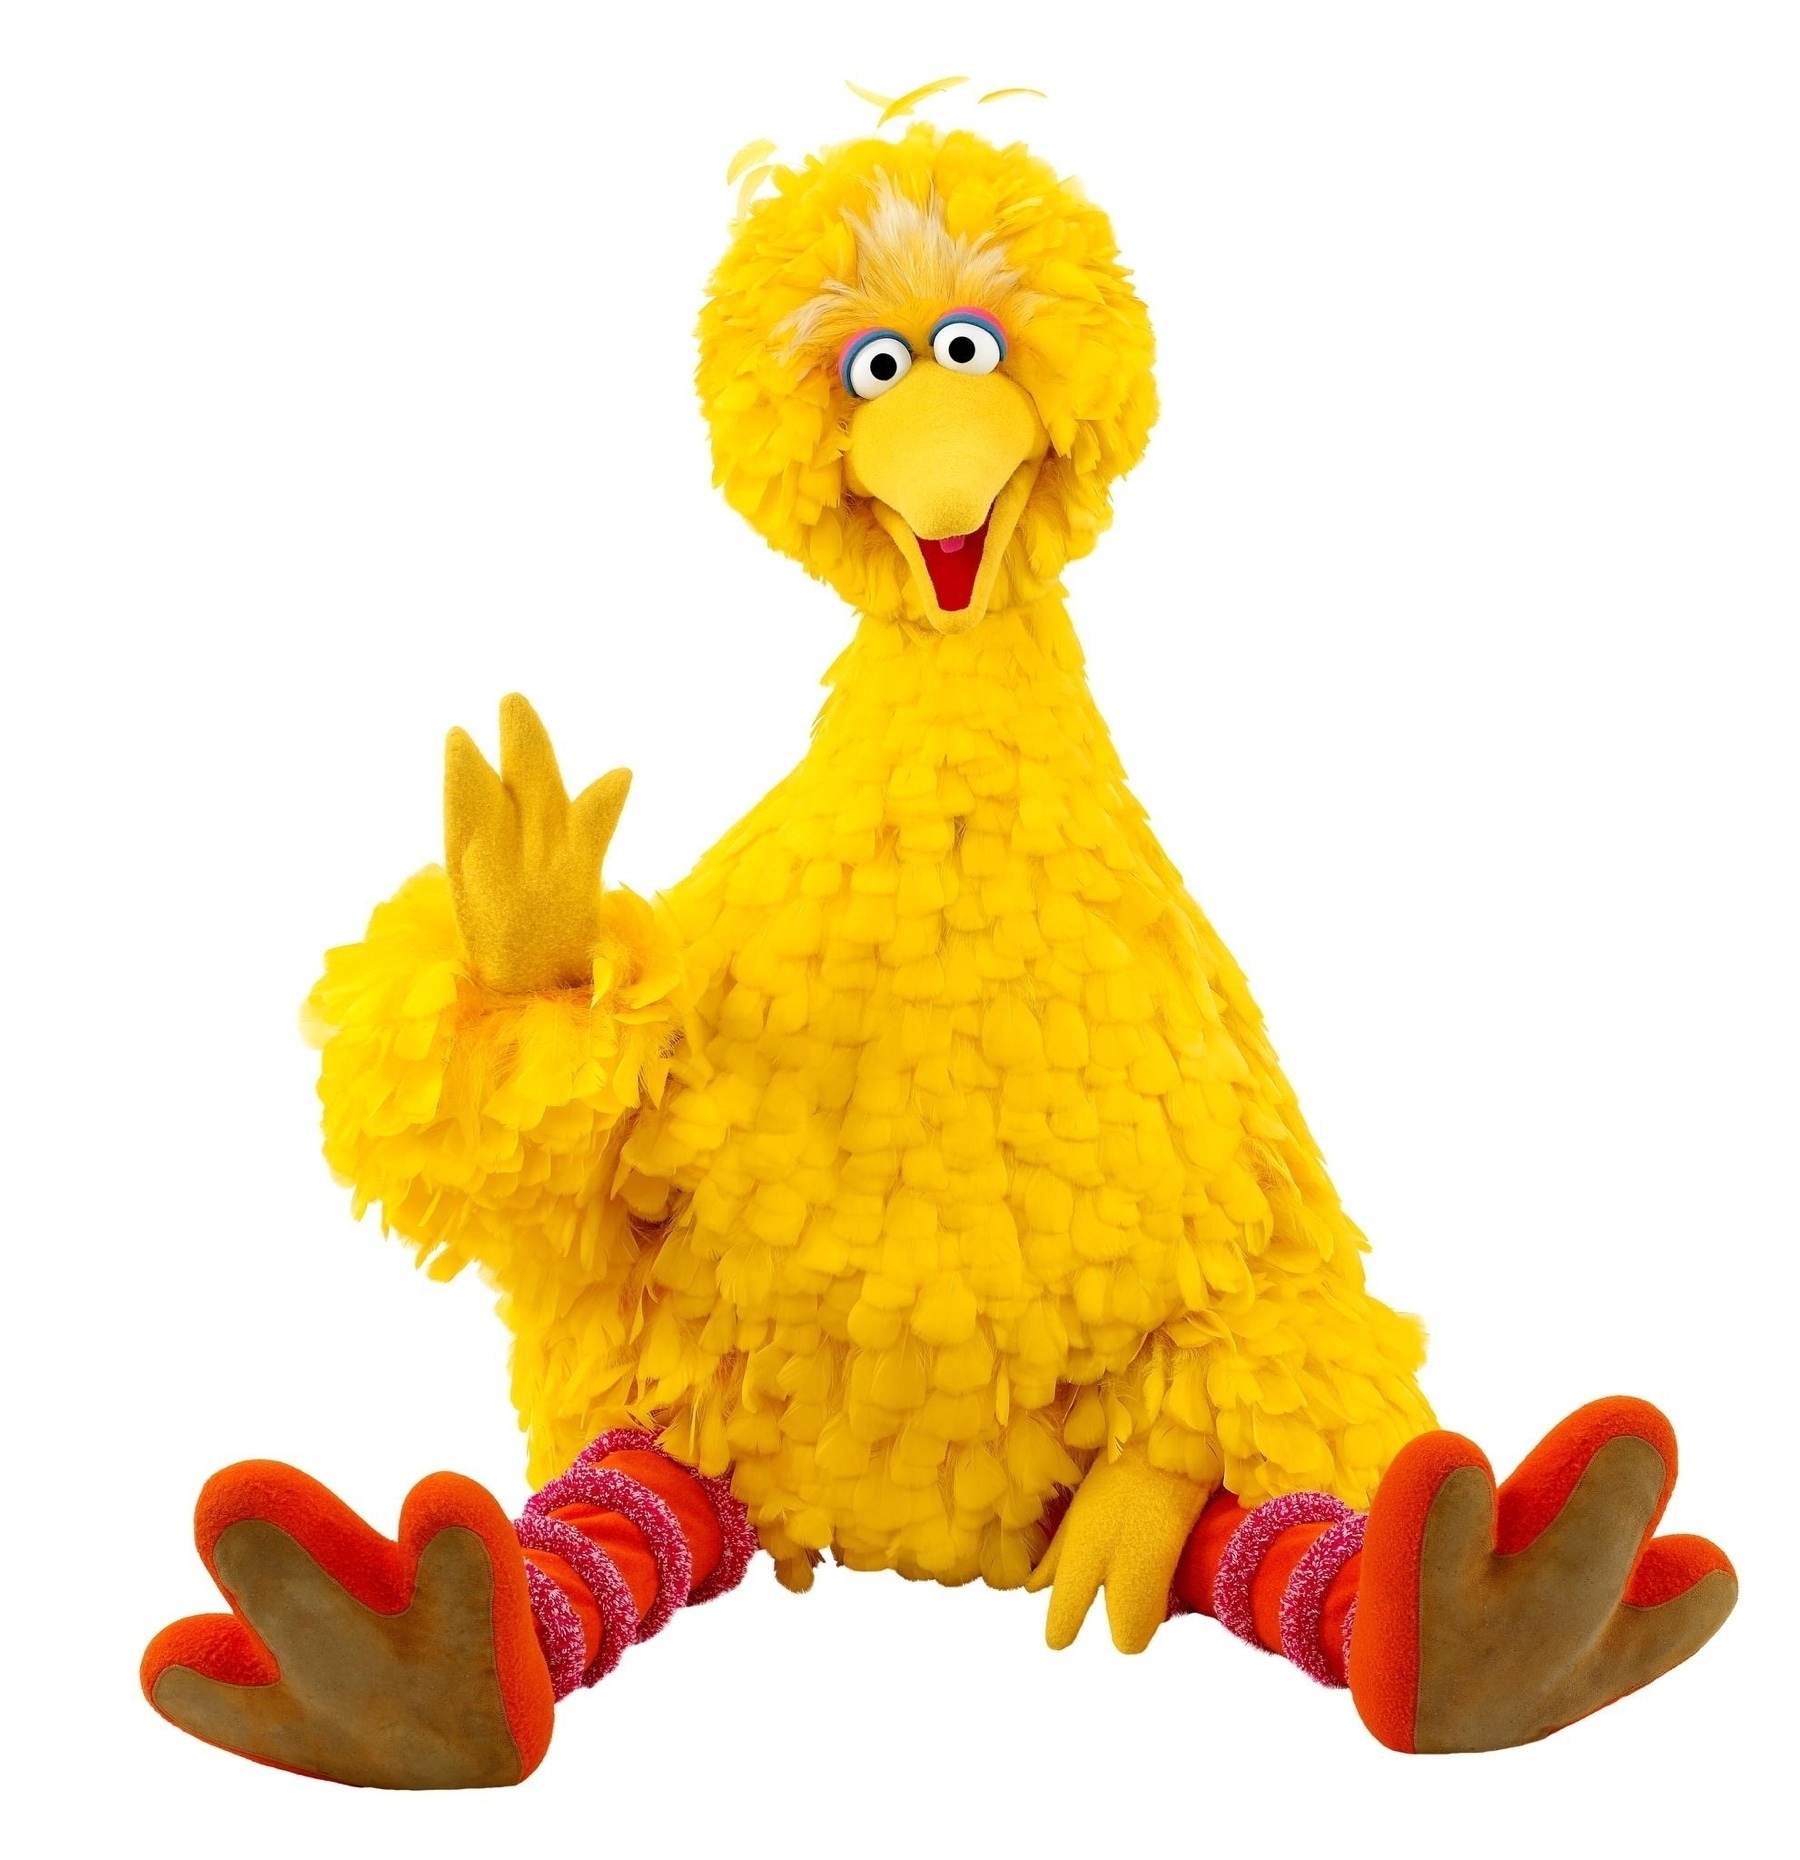 Big bird is a character from Sesame Street. it is an eight-foot two-inch tall bright yellow anthropomorphic bird.